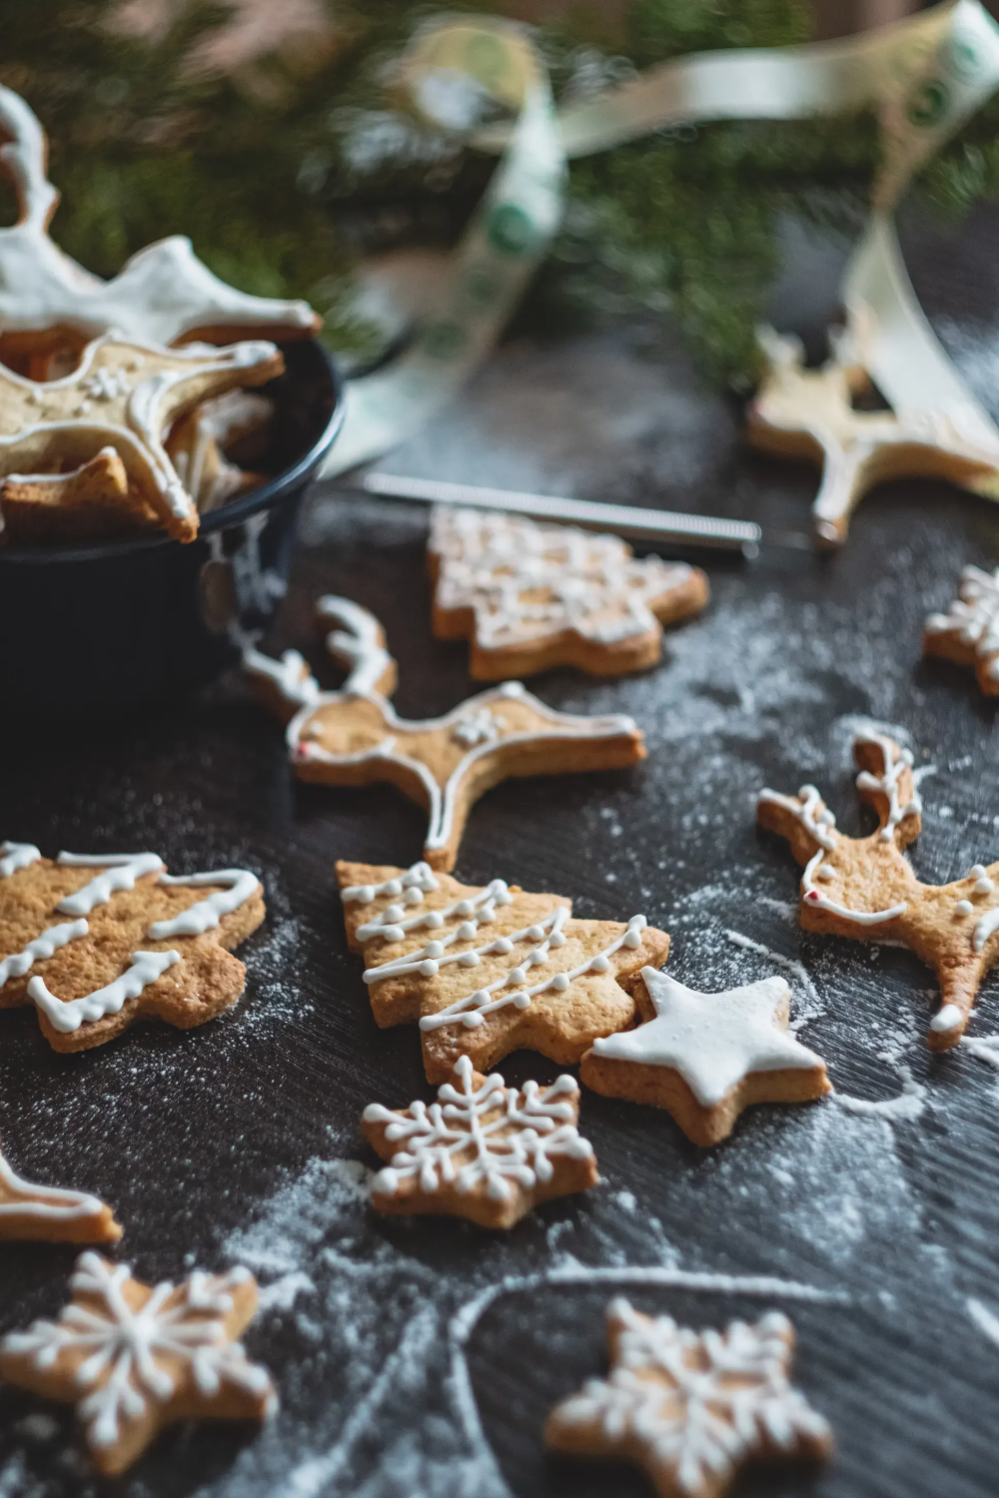 Iced and decorated gingerbread cookies on a countered dusted with flour.